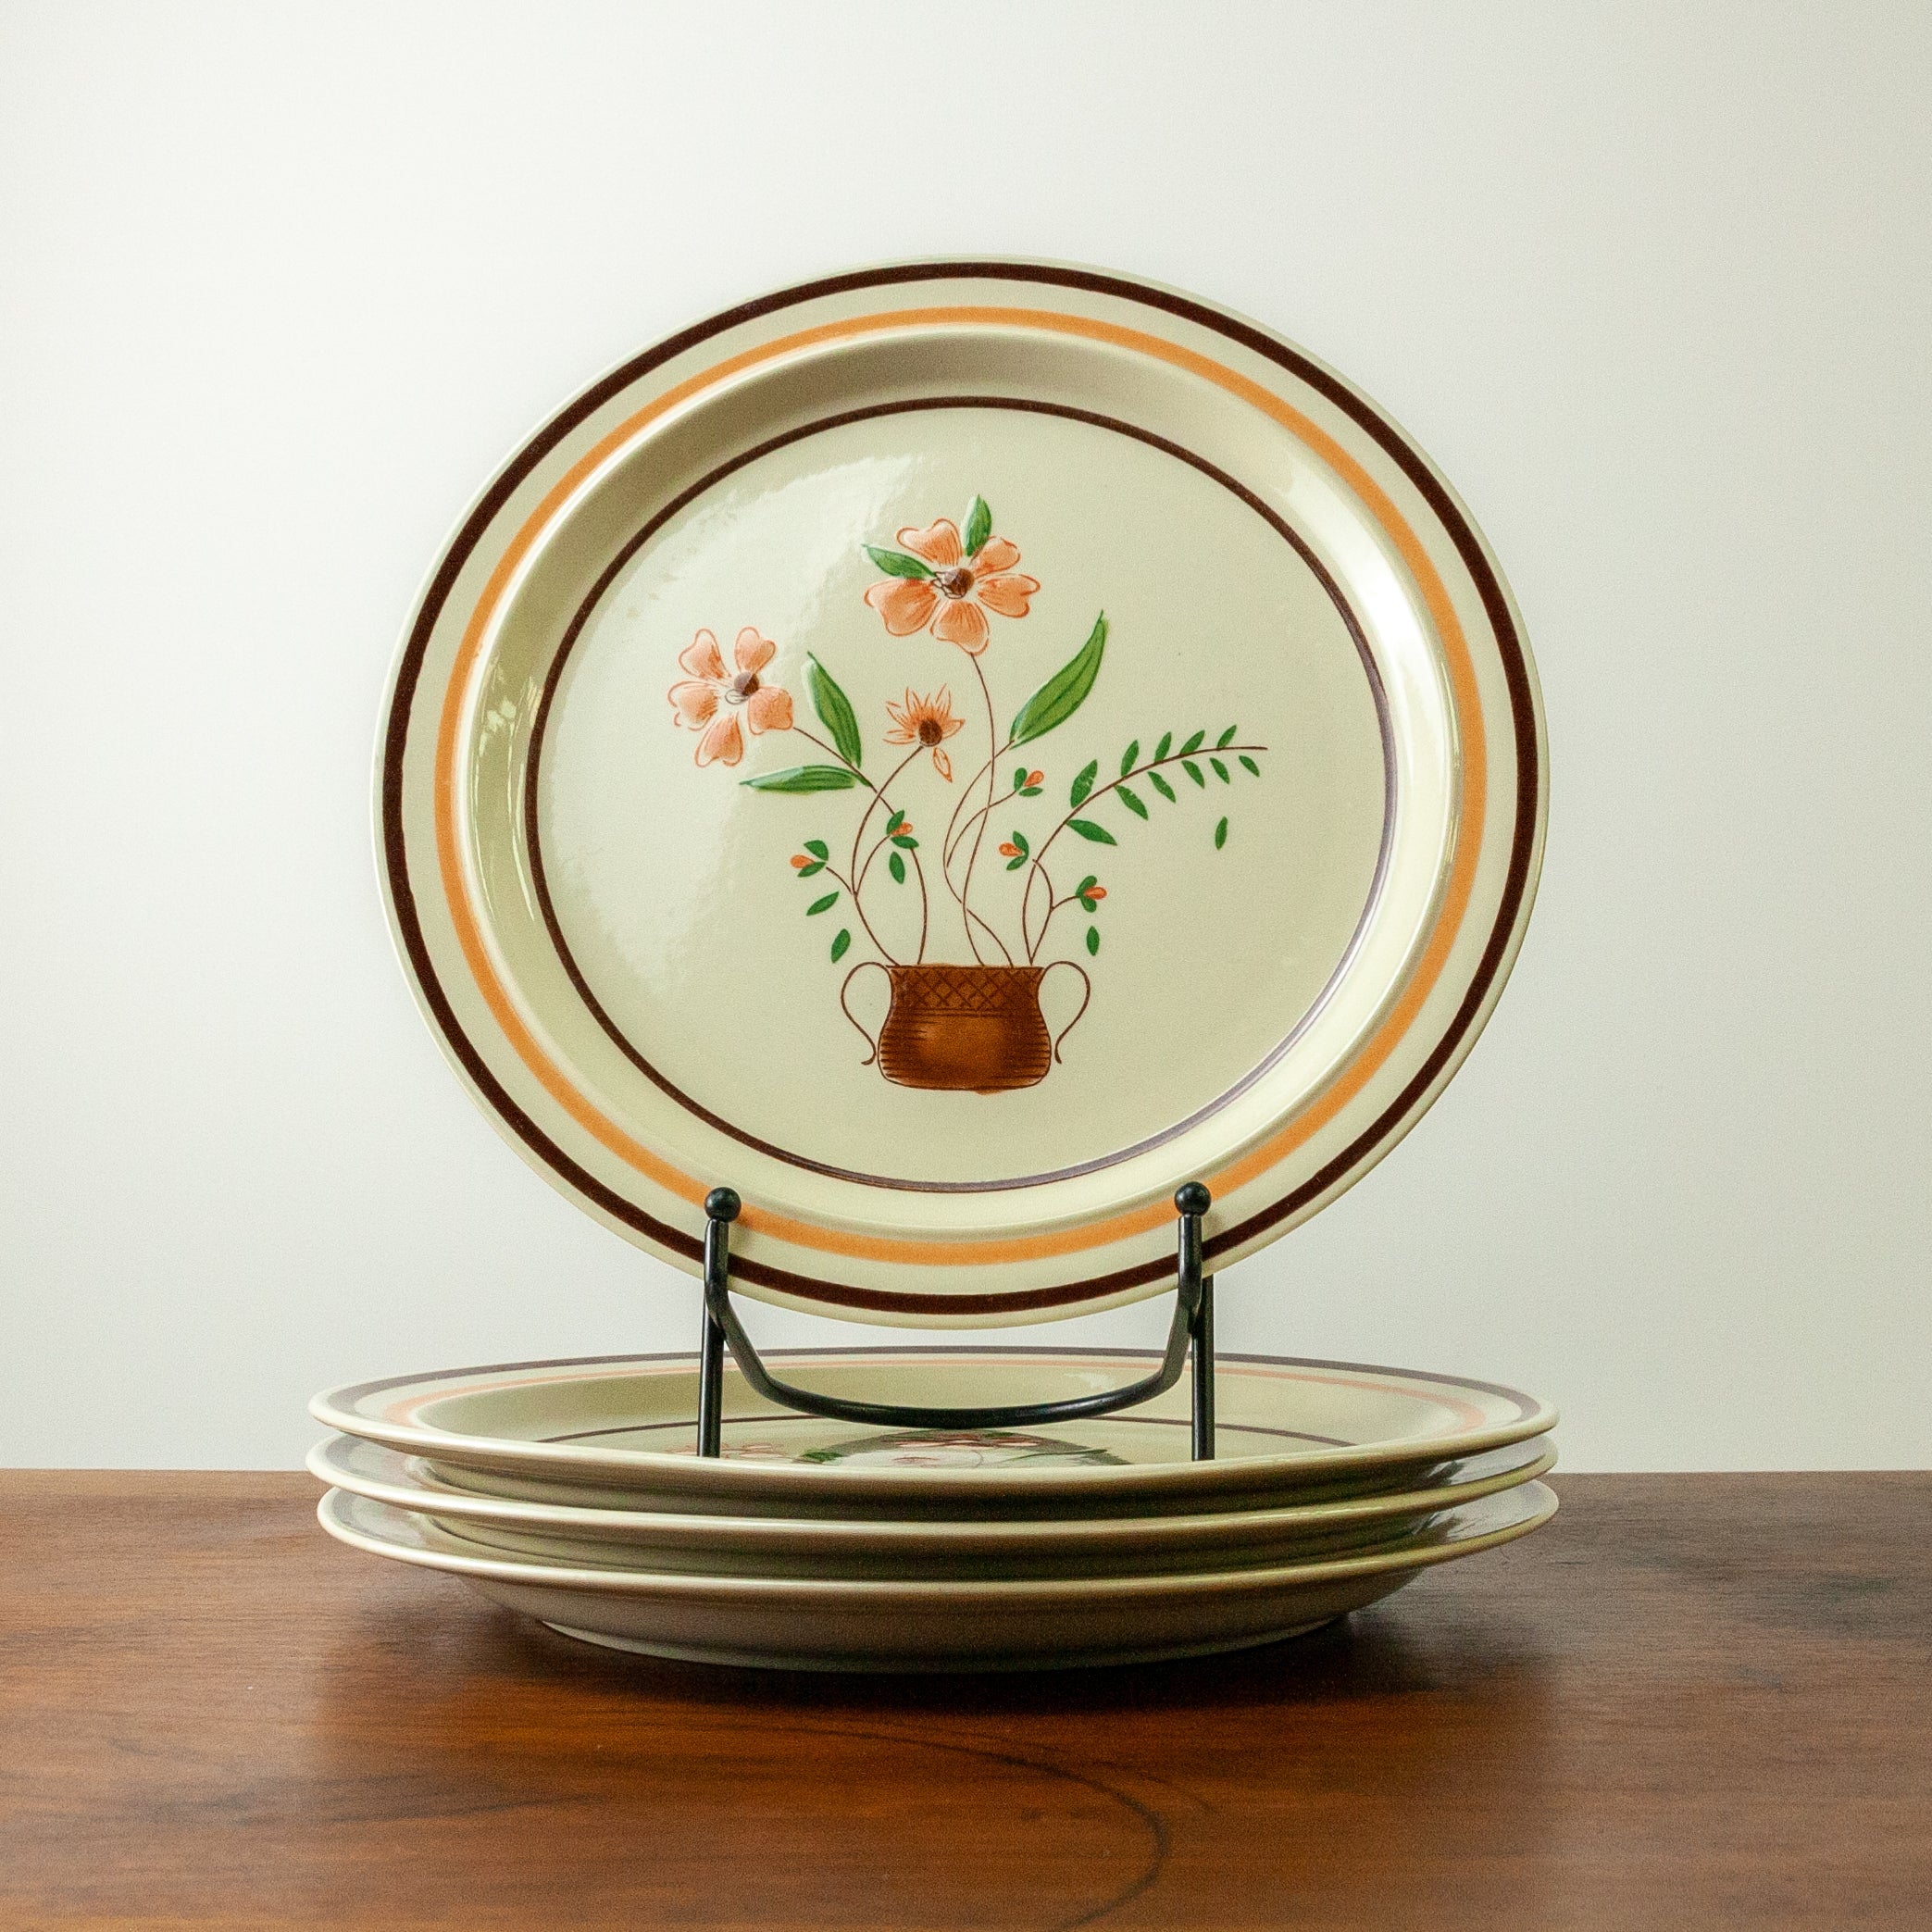 Countryside Stoneware Dinner Plates (Set of 4)